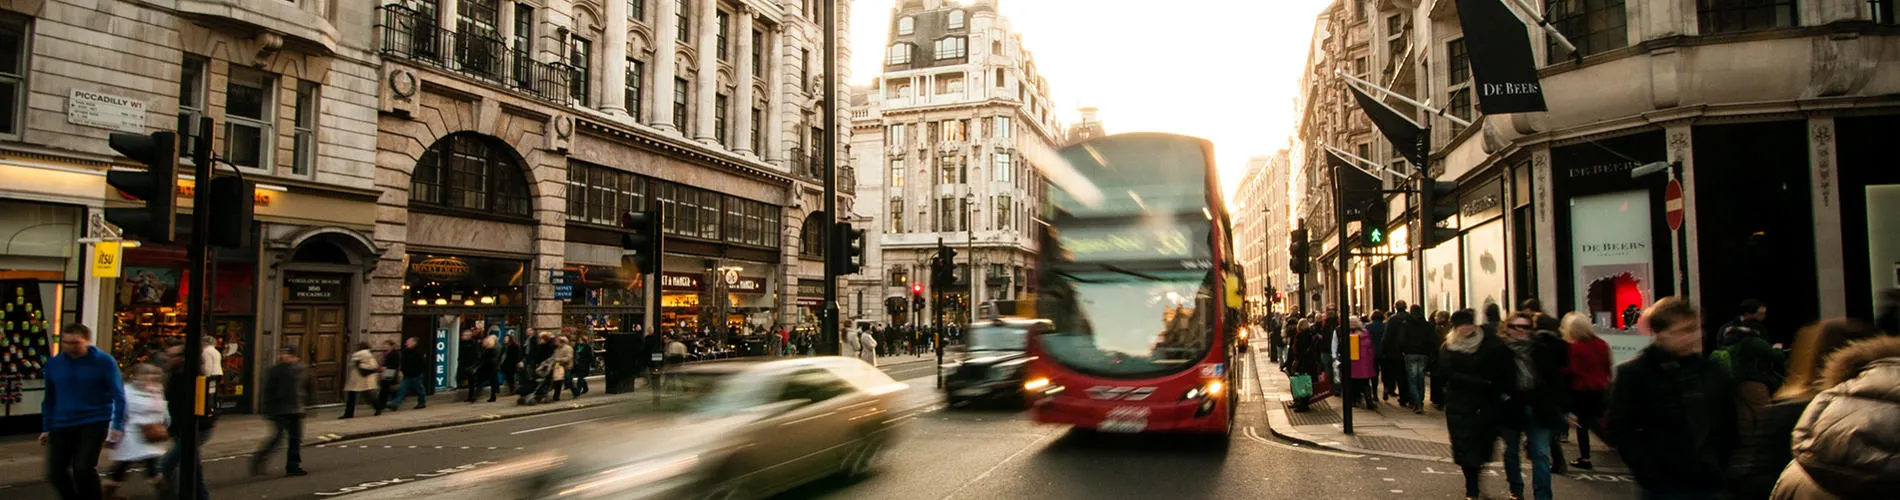 A street in London with people walking and a red bus